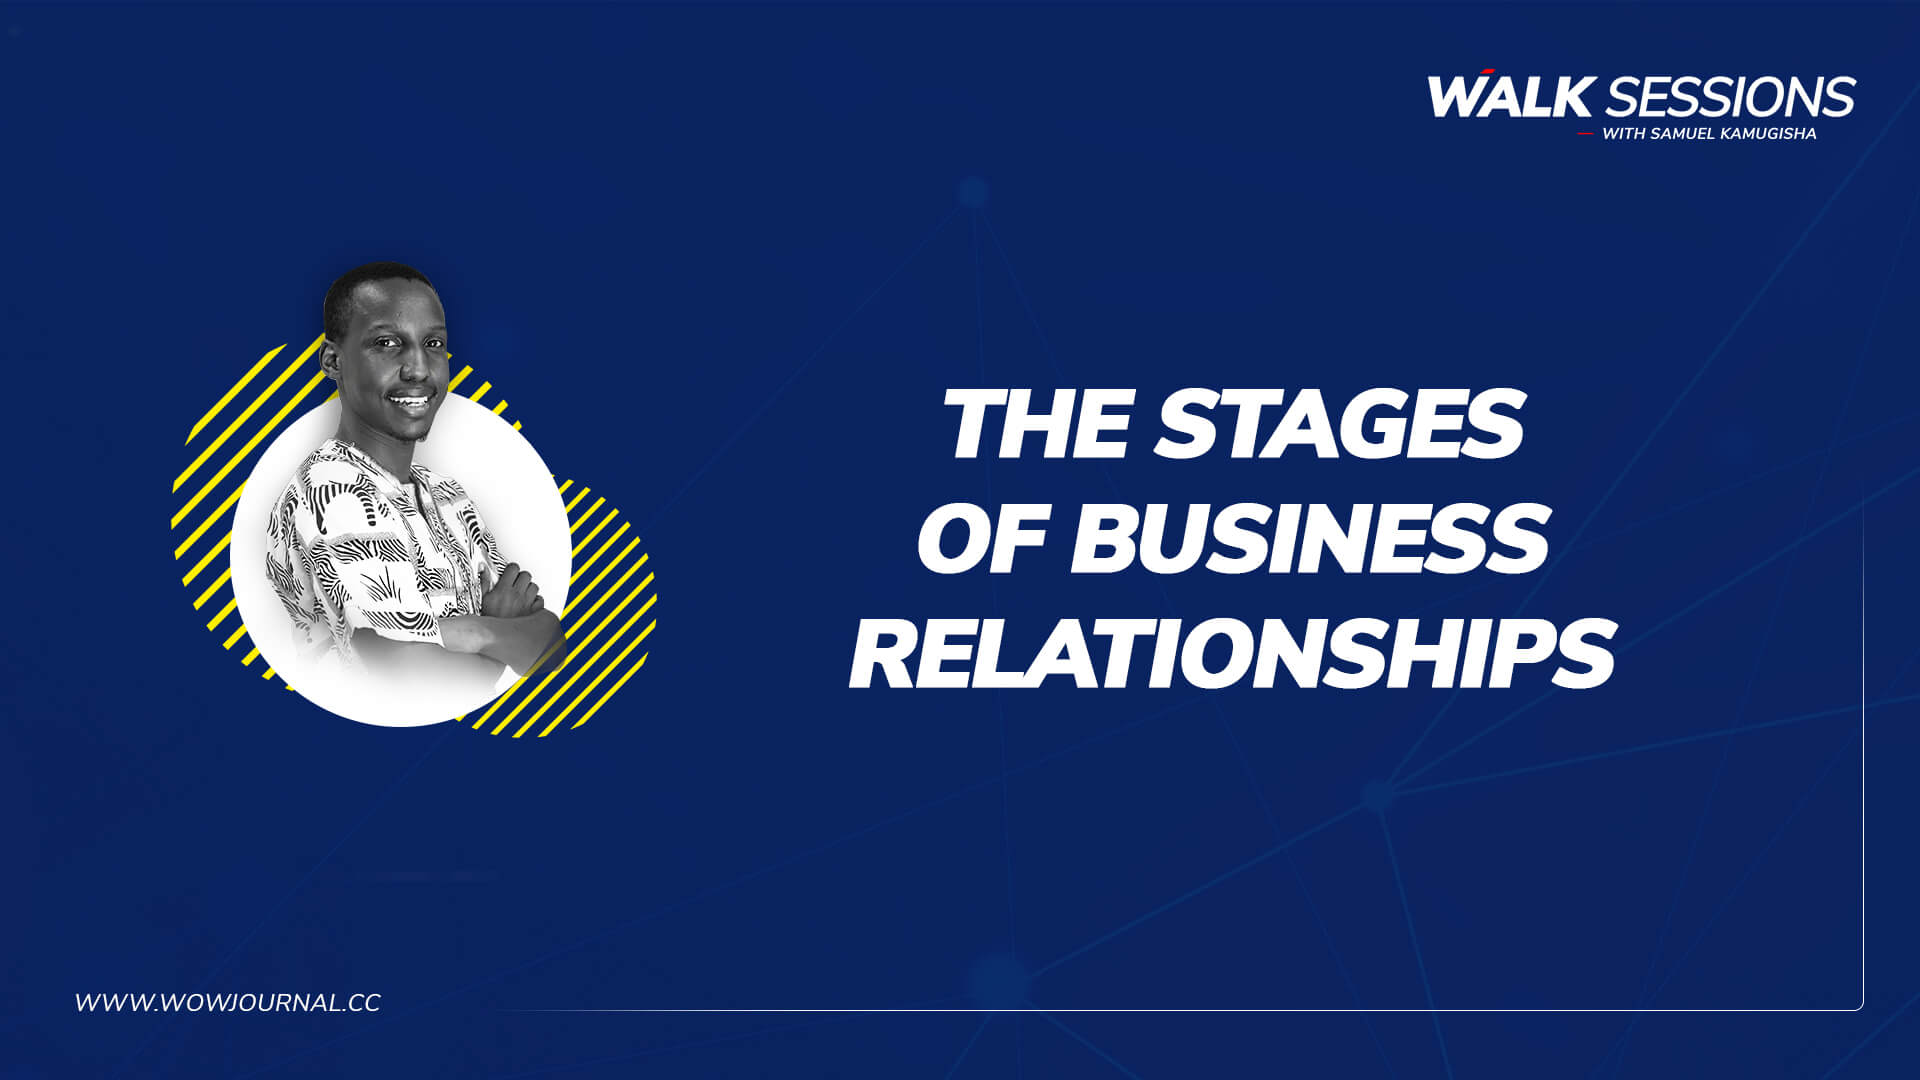 Walksessions - Episode 1 - Stages of Business Relationships